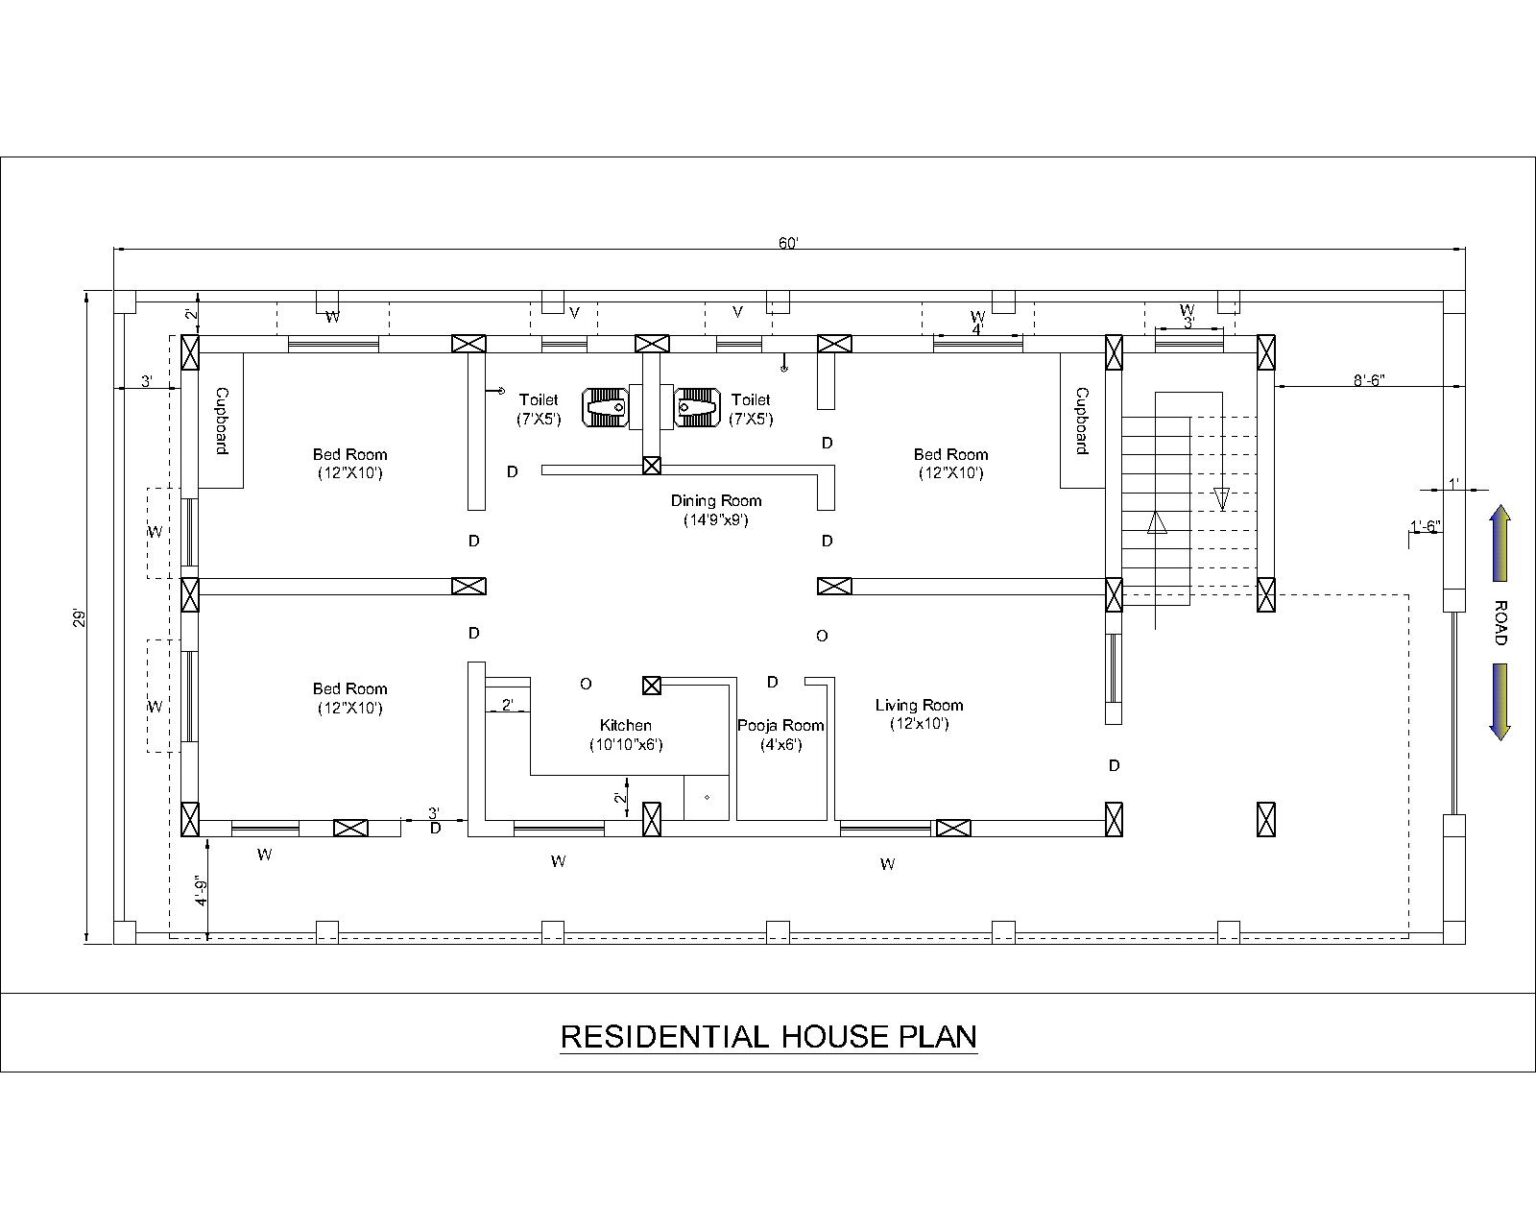 HOUSE PLAN FOR RENT PURPOSE, PLOT SIZE 60'X29' - T Square Civil Engineering